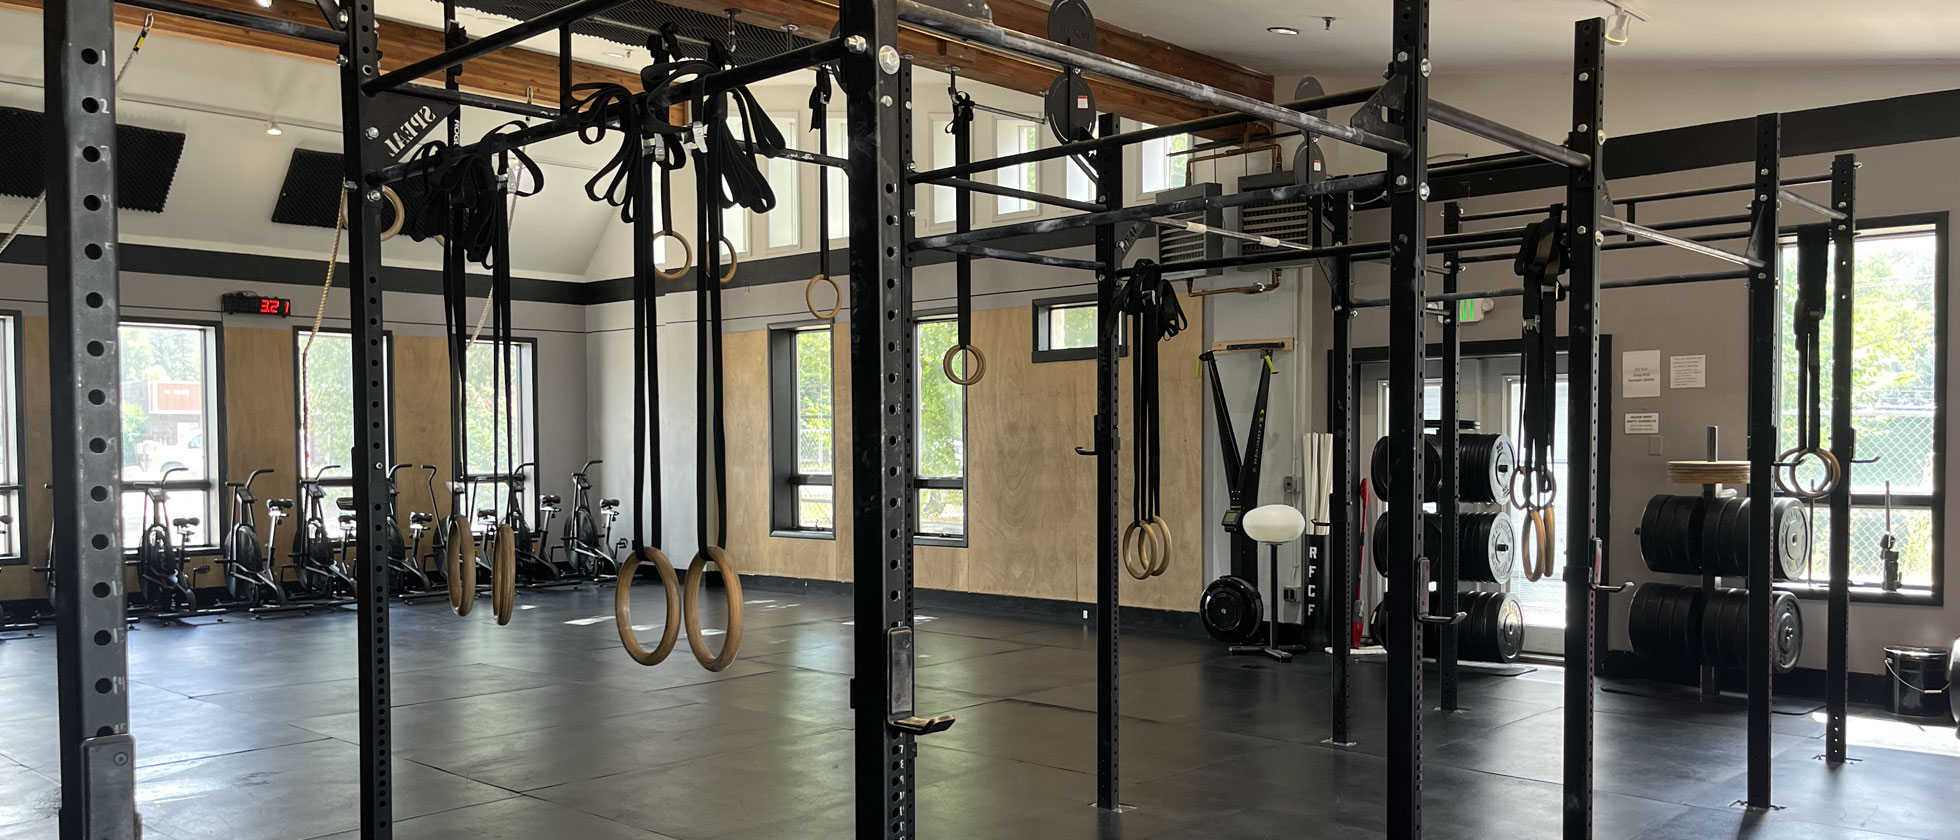 Why Roaring Fork CrossFit Is Ranked One of The Best Gyms In Basalt